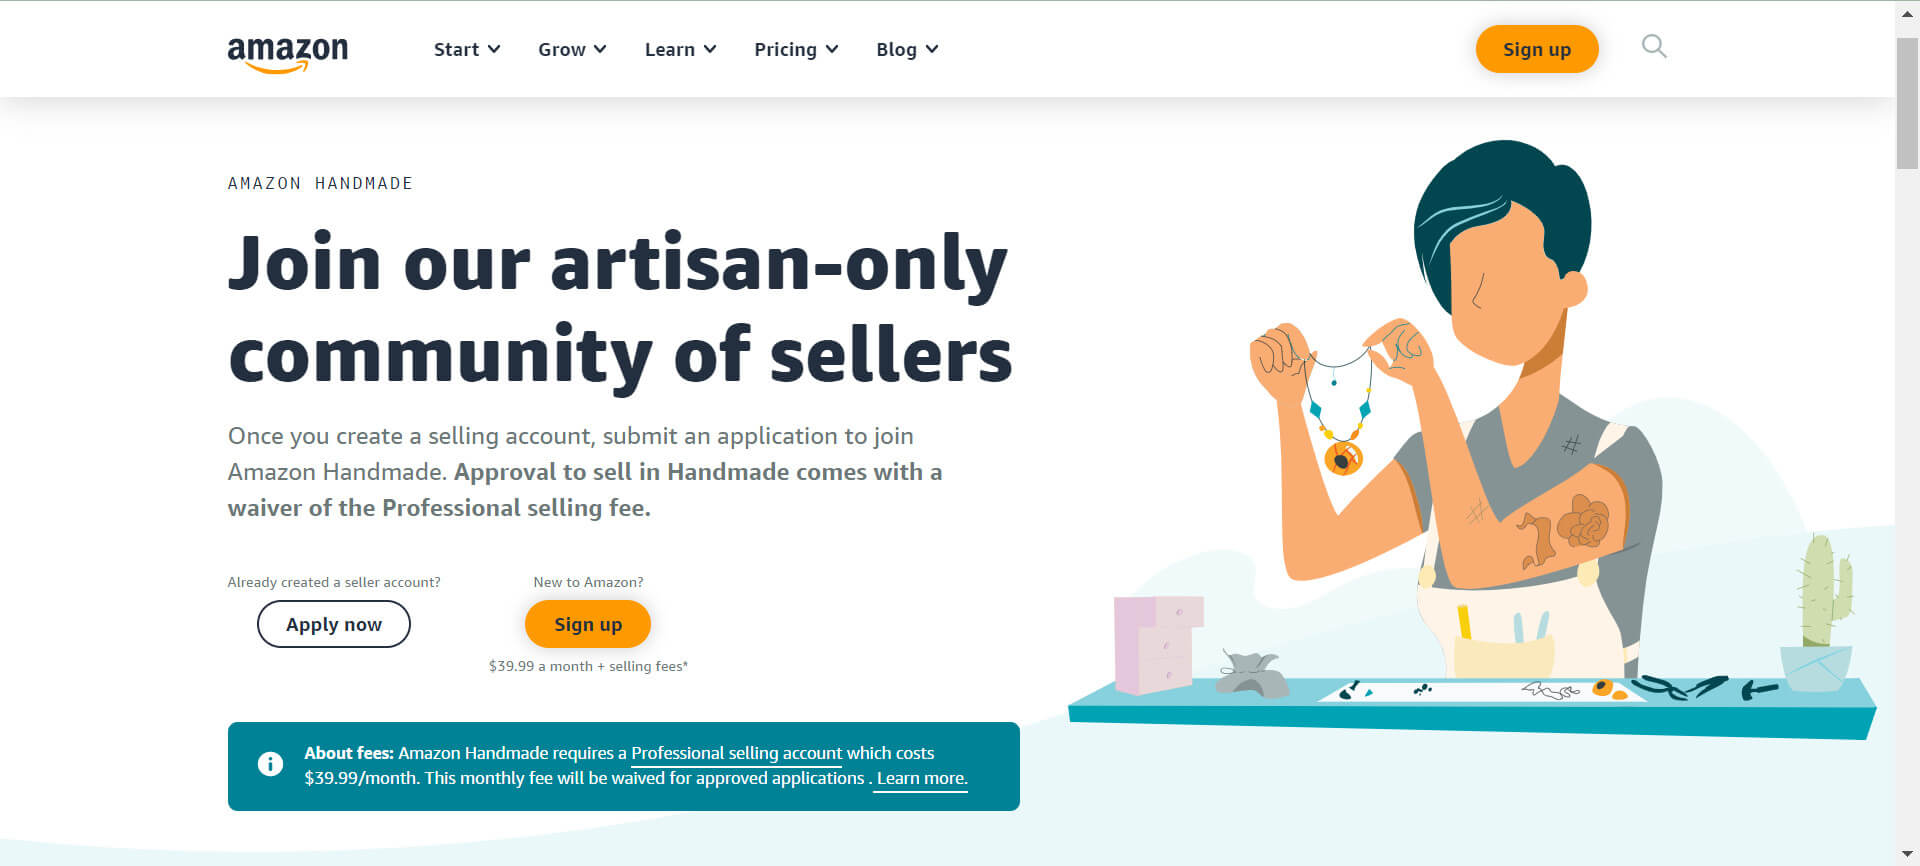 Amazon Handmade was developed to be one of the Etsy competitors